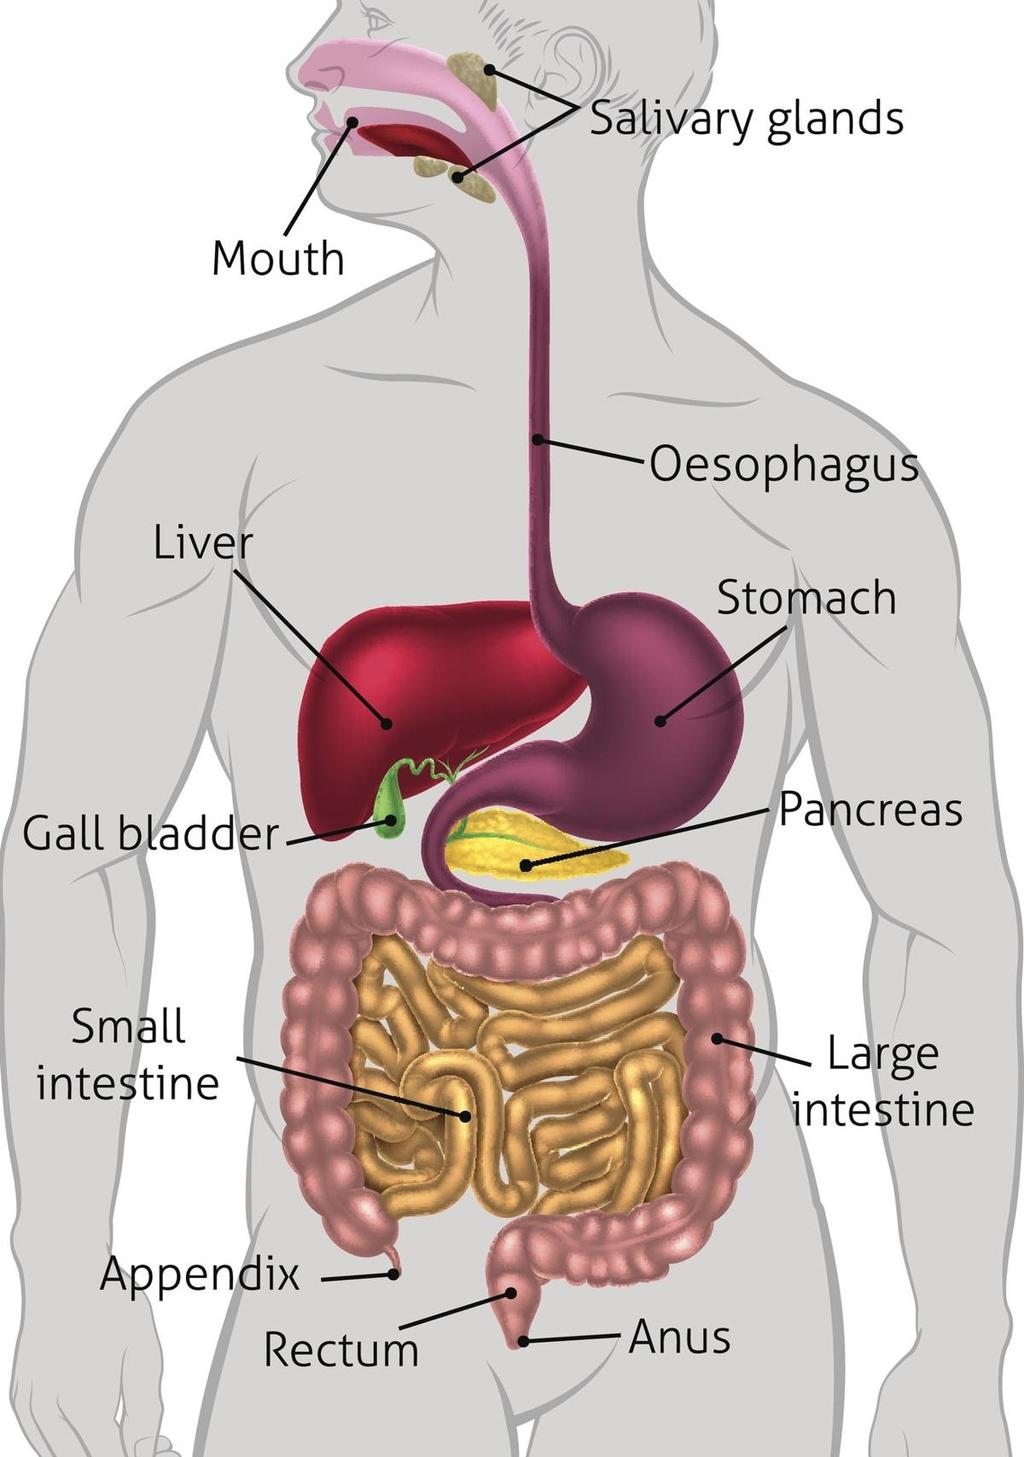 Importance of the Digestive System/Function - Function: ensure proper digestion and absorption of nutrients Food are made up of complex